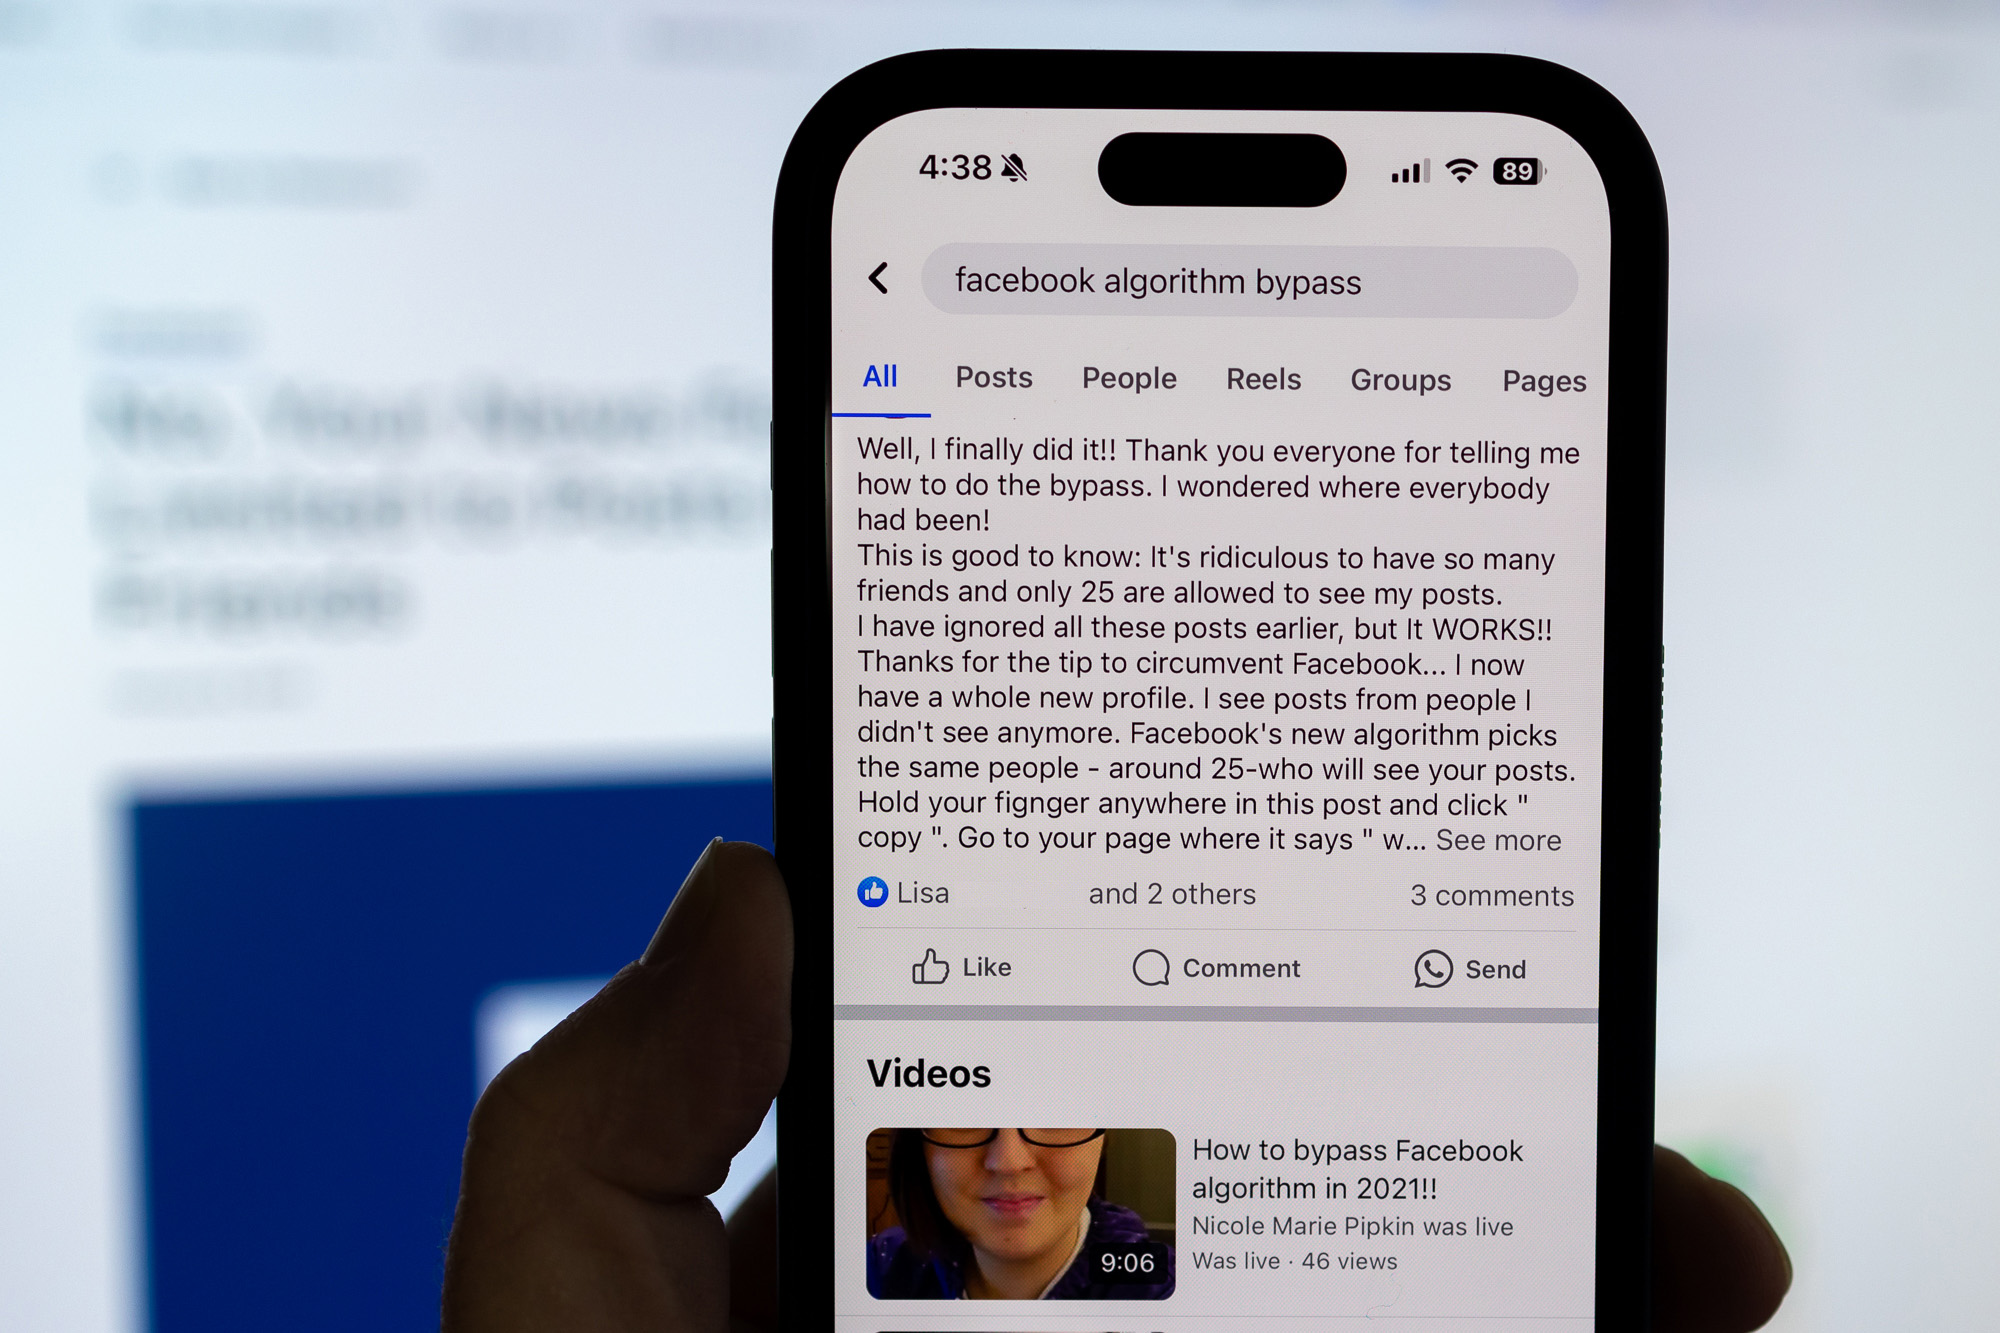 Facebook Introduces Anonymous Login to Limit Third-party App